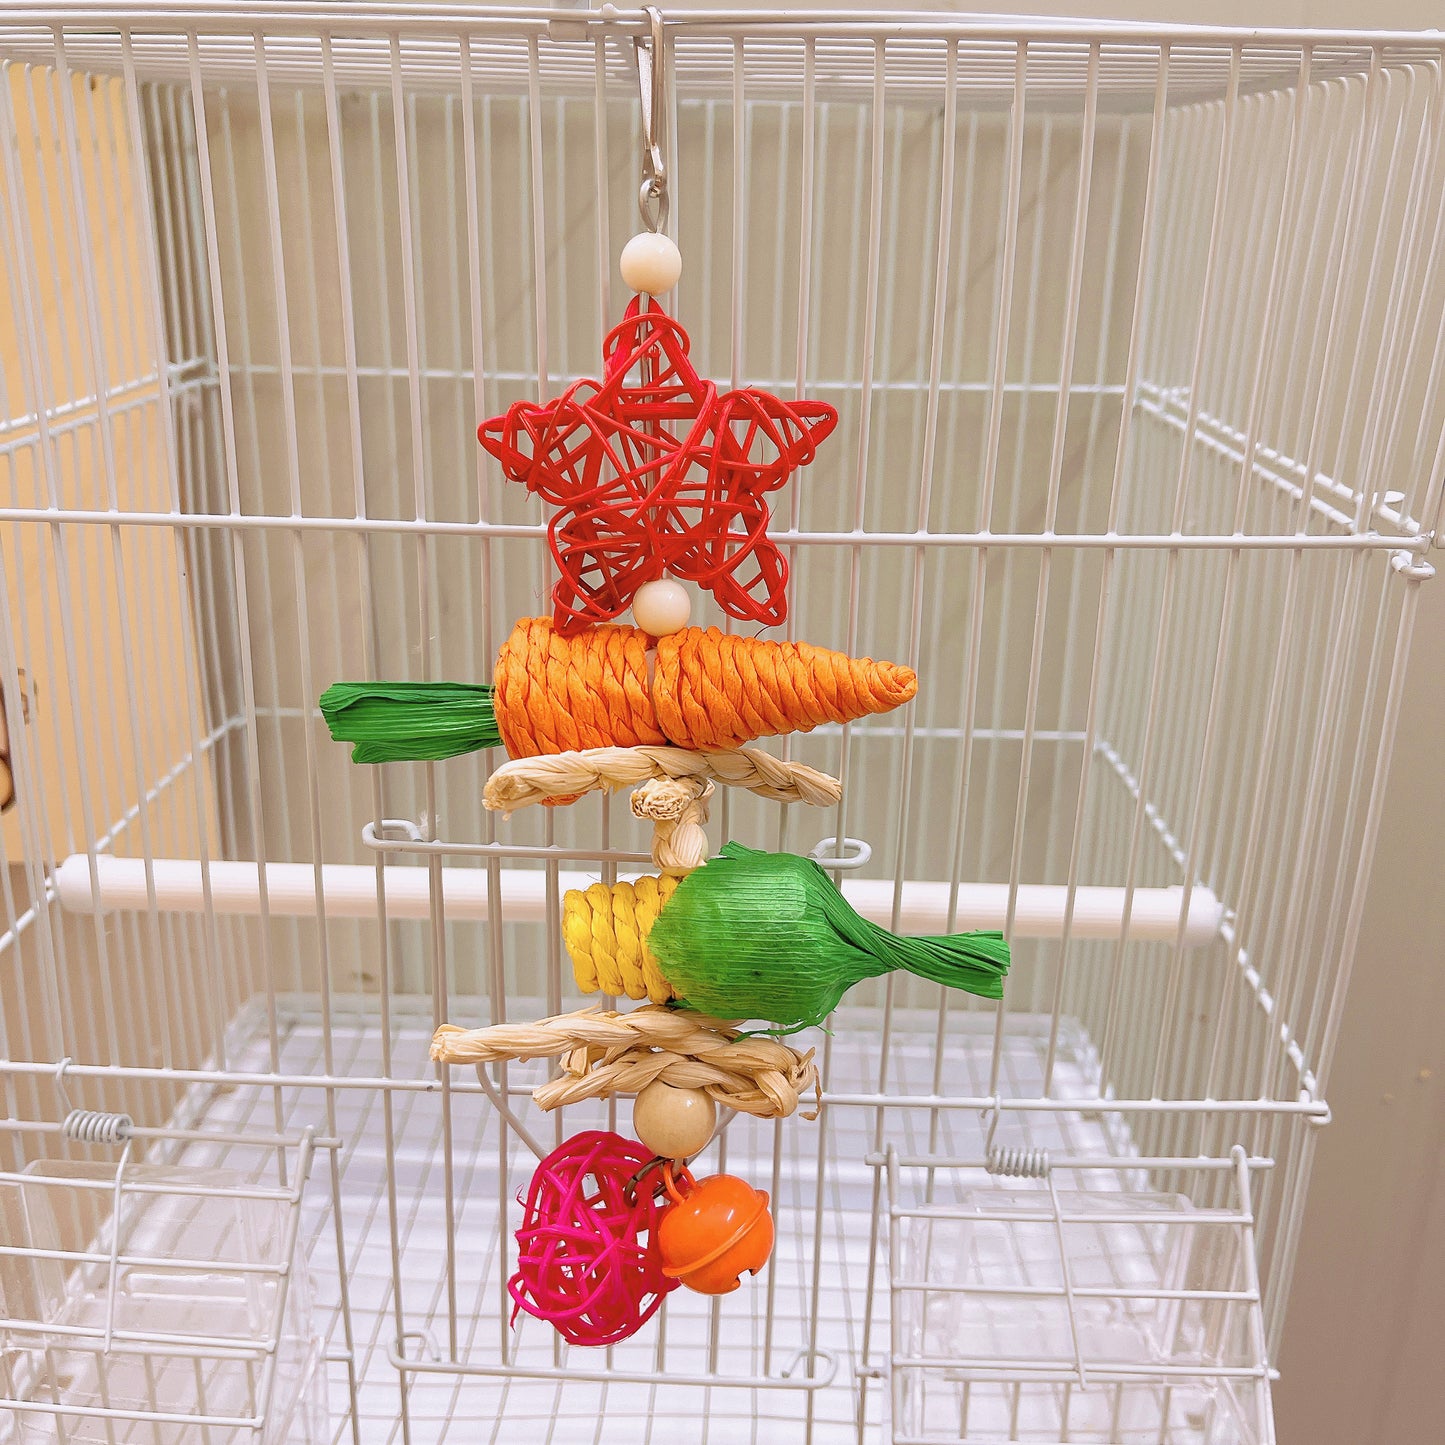 2pcs Handmade Multicolored Parrot Indoor Birds Chew Toy with Hook - Bird Entertainment Tool with Star Chew for Parakeet/Budgie, Cockatiel, Finch, Lovebird, Monk Parakeet, Dove, Parrotlet, Sparrow